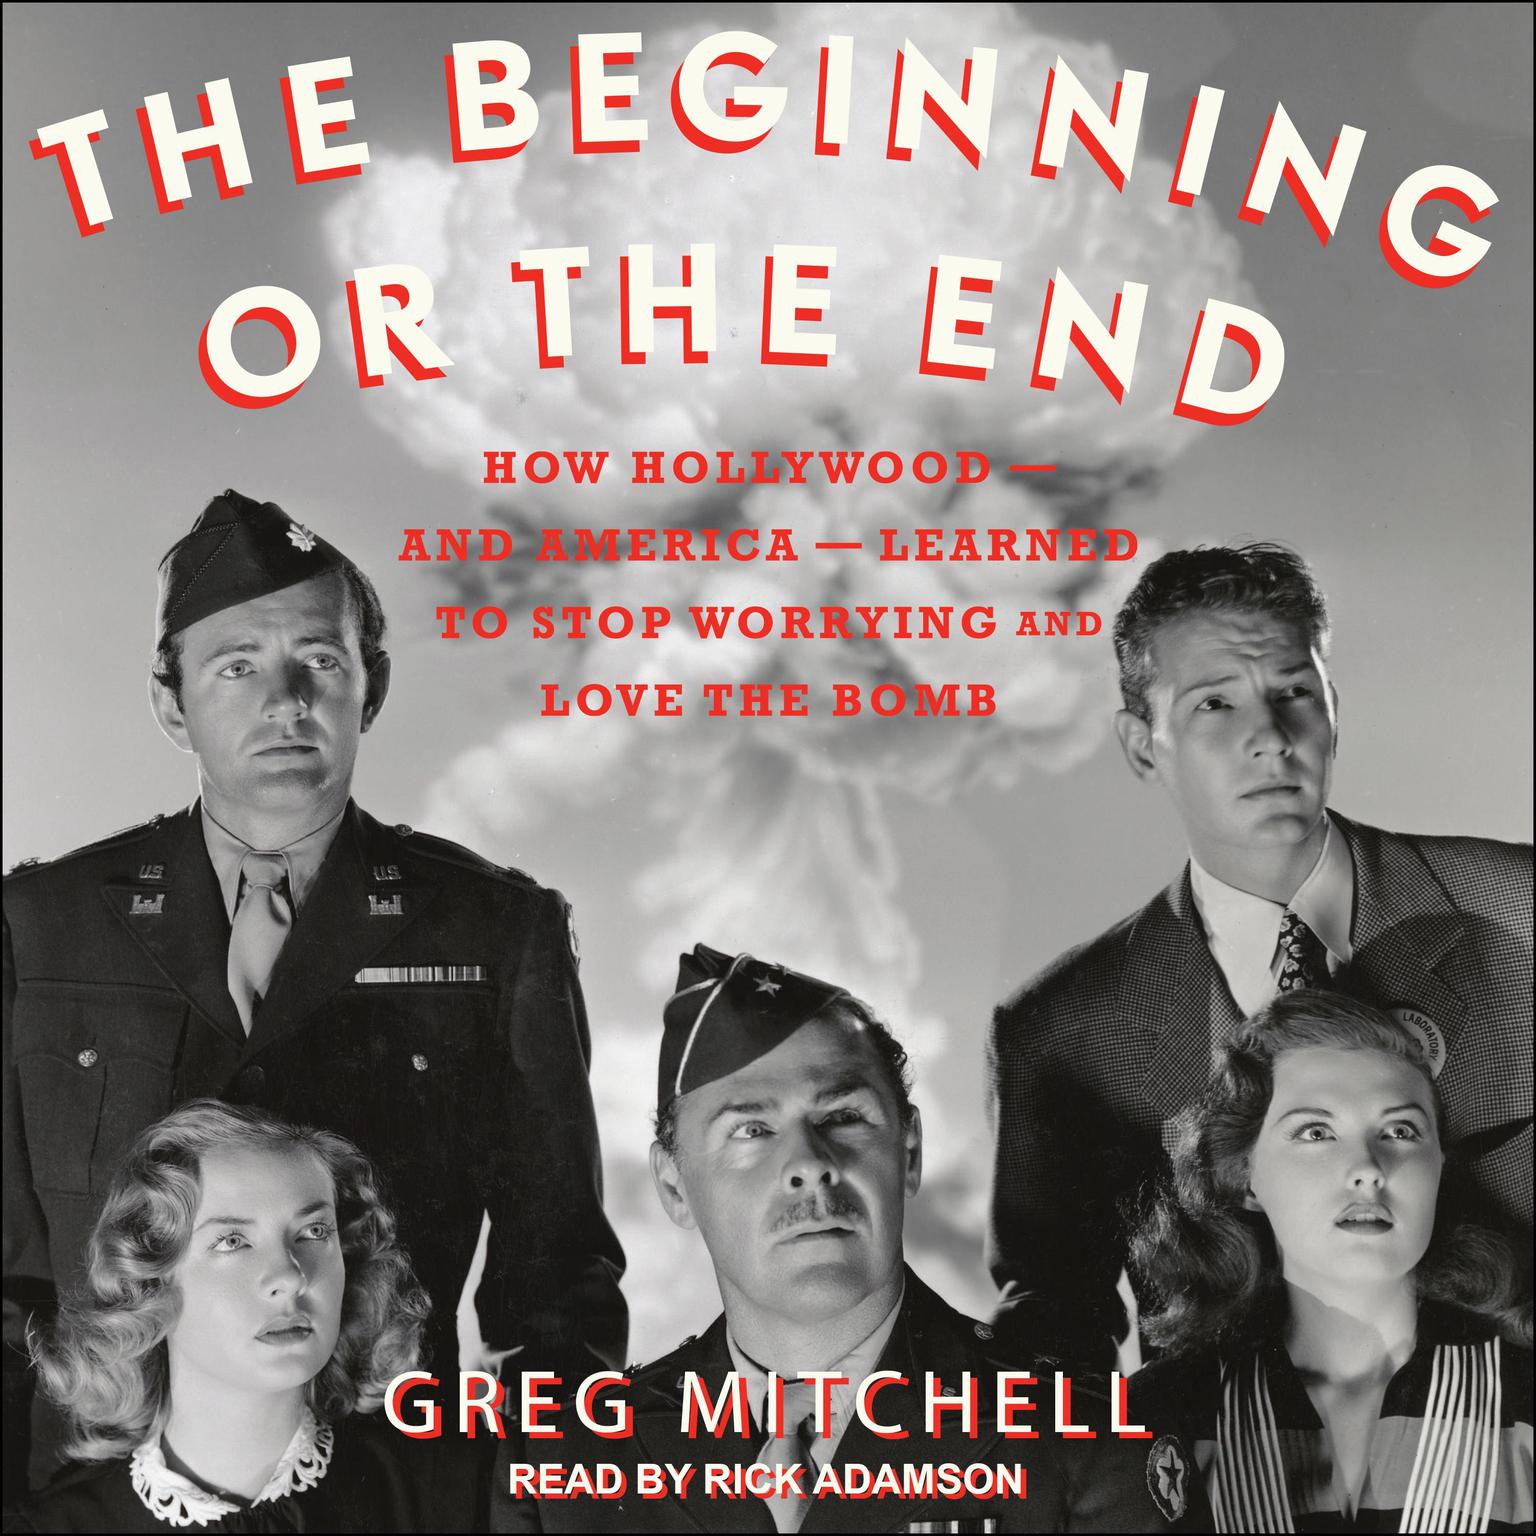 The Beginning or the End: How Hollywood - and America - Learned to Stop Worrying and Love the Bomb Audiobook, by Greg Mitchell